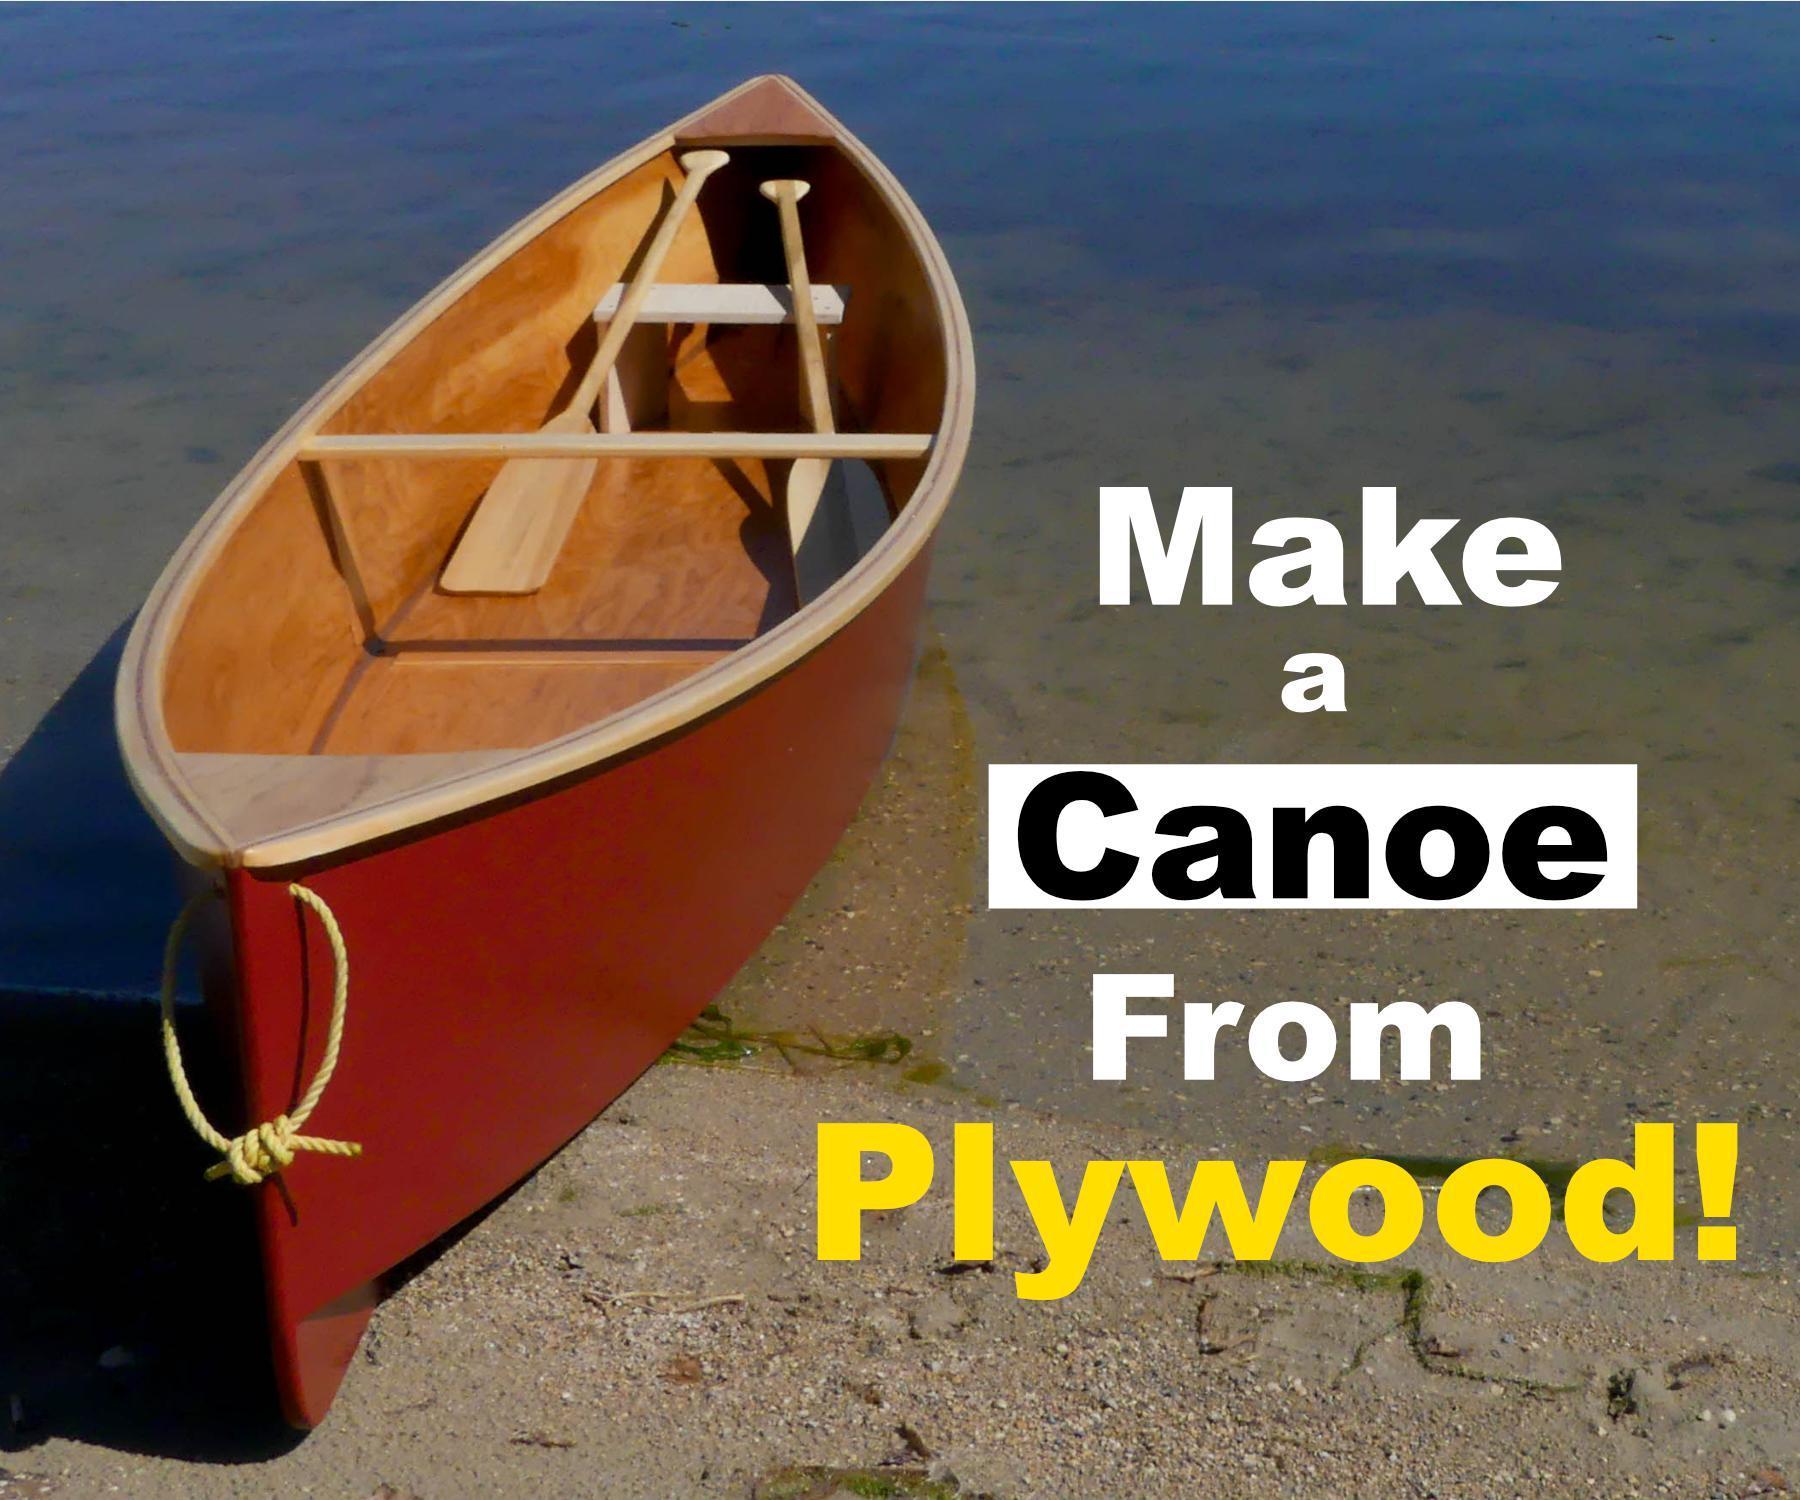 "Quick" Canoe Made From Plywood